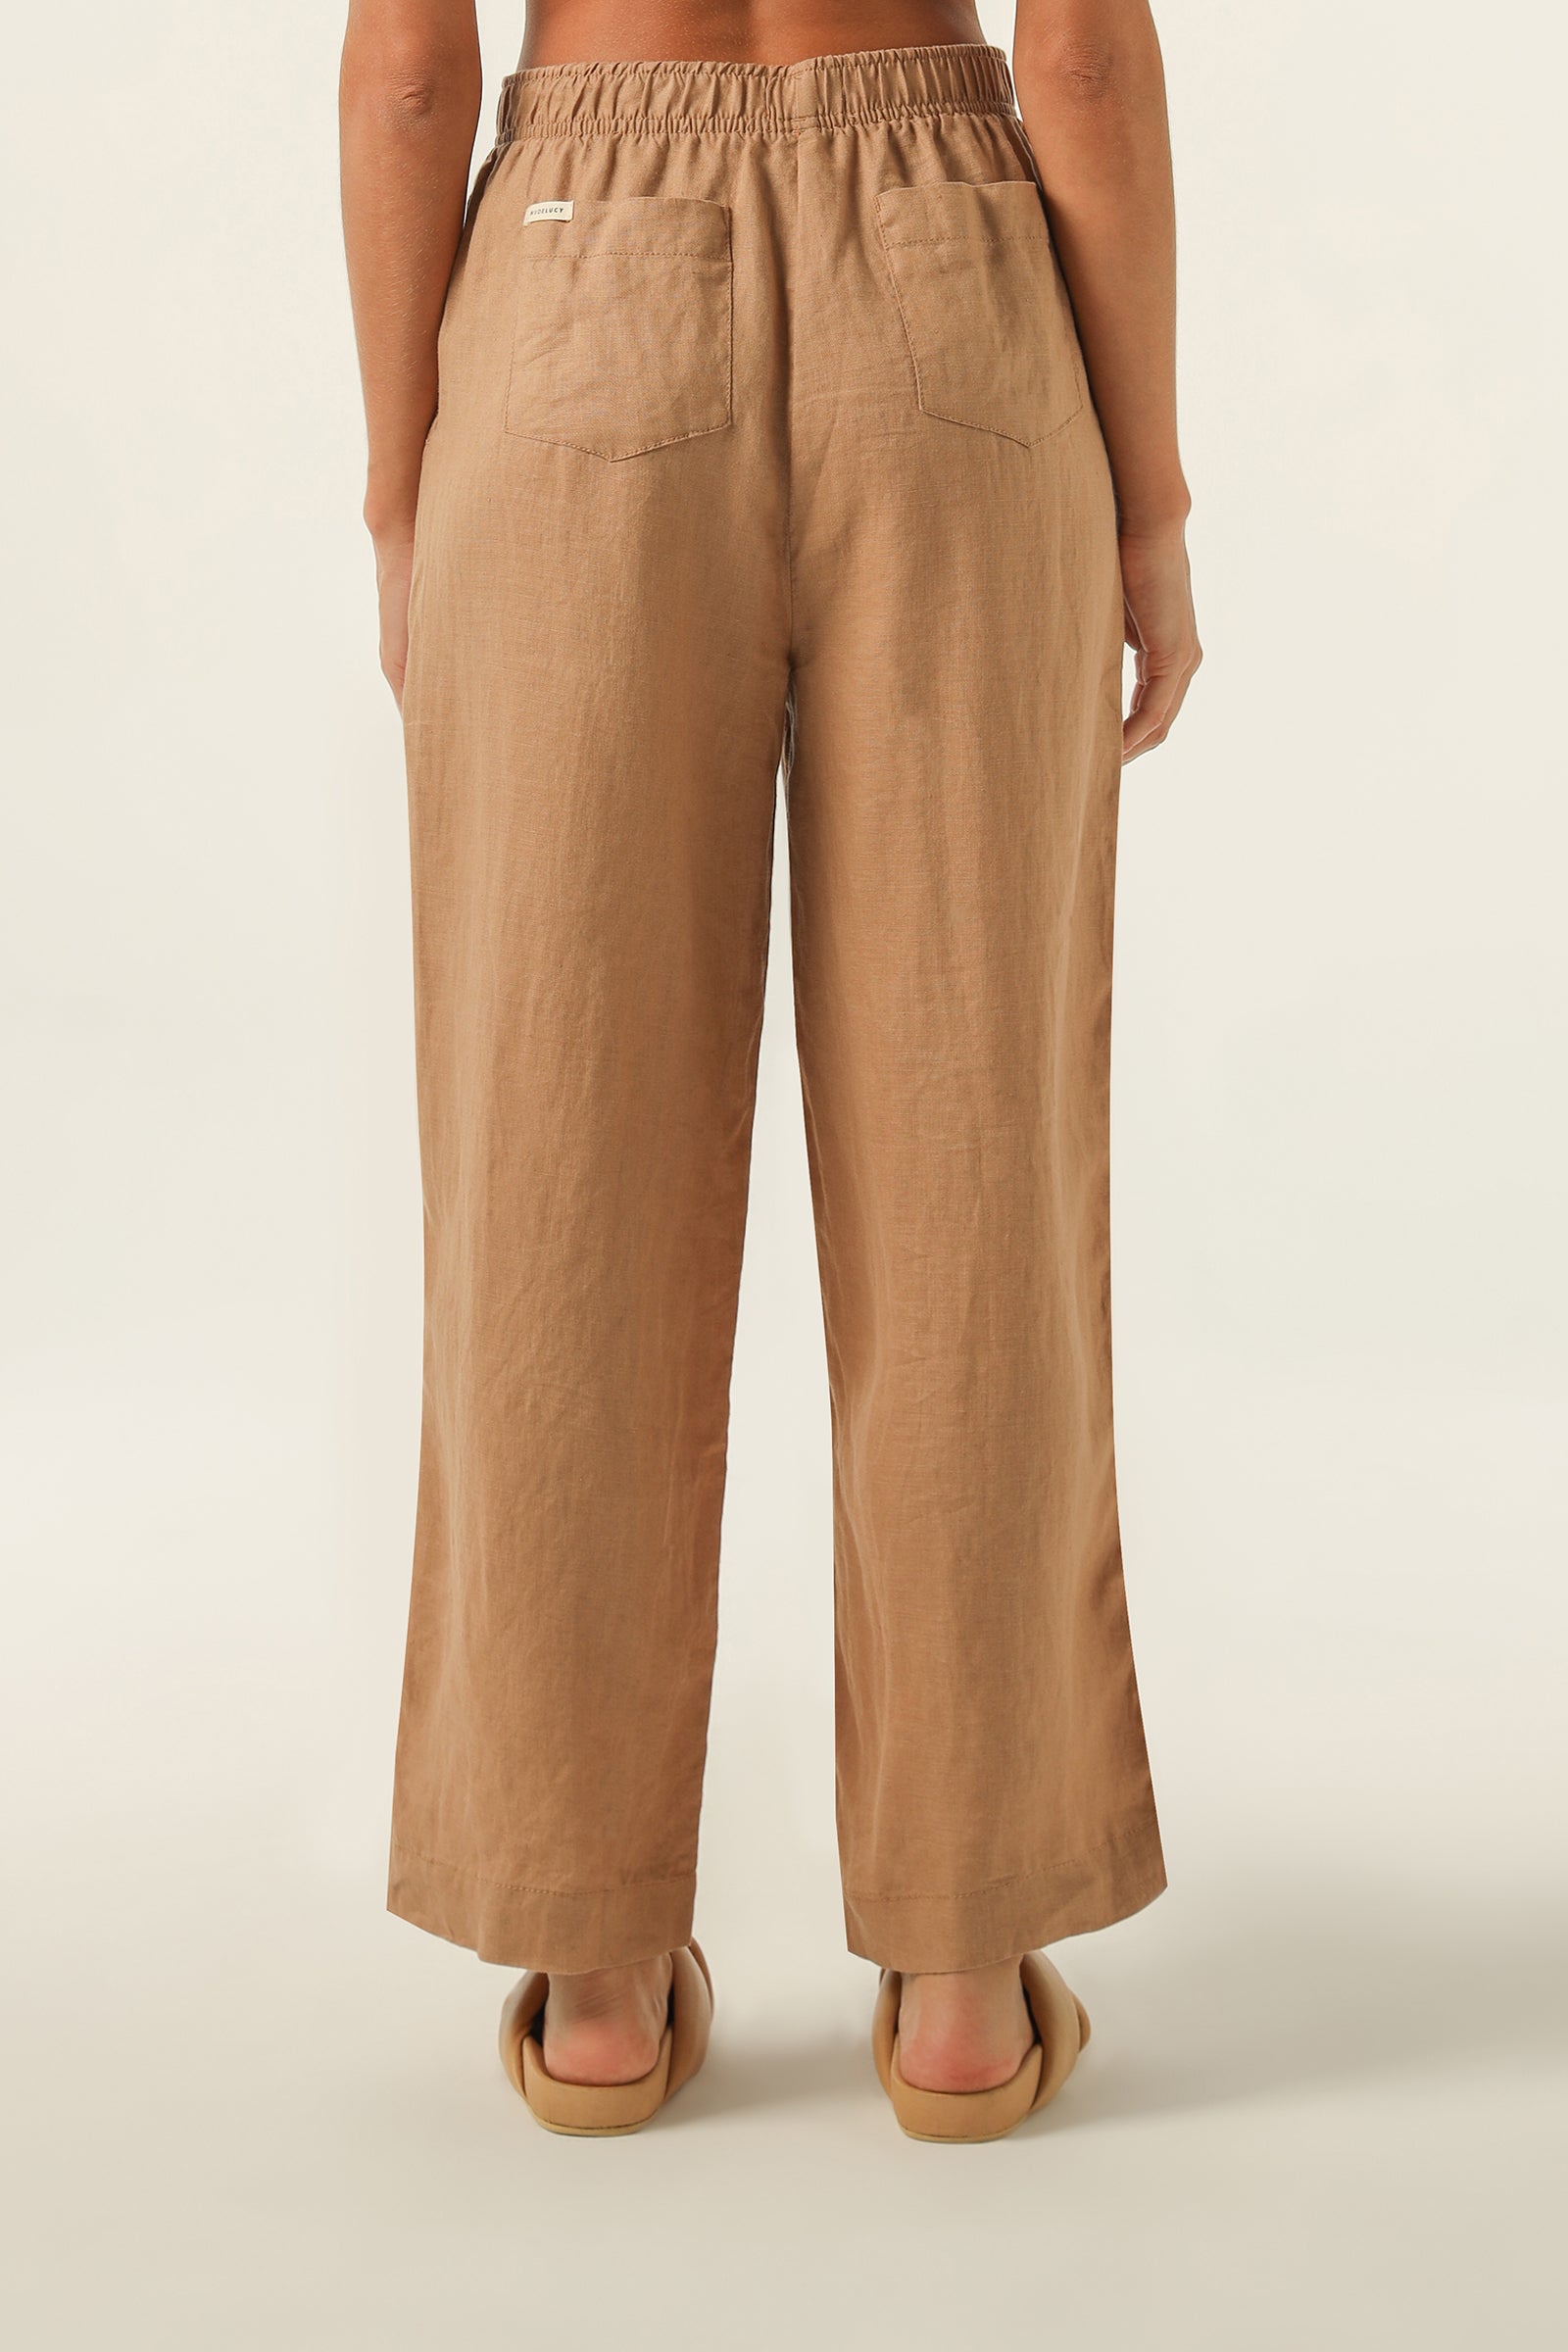 Nude Lucy Lounge Linen Crop Pant In A Brown Coffee Colour 